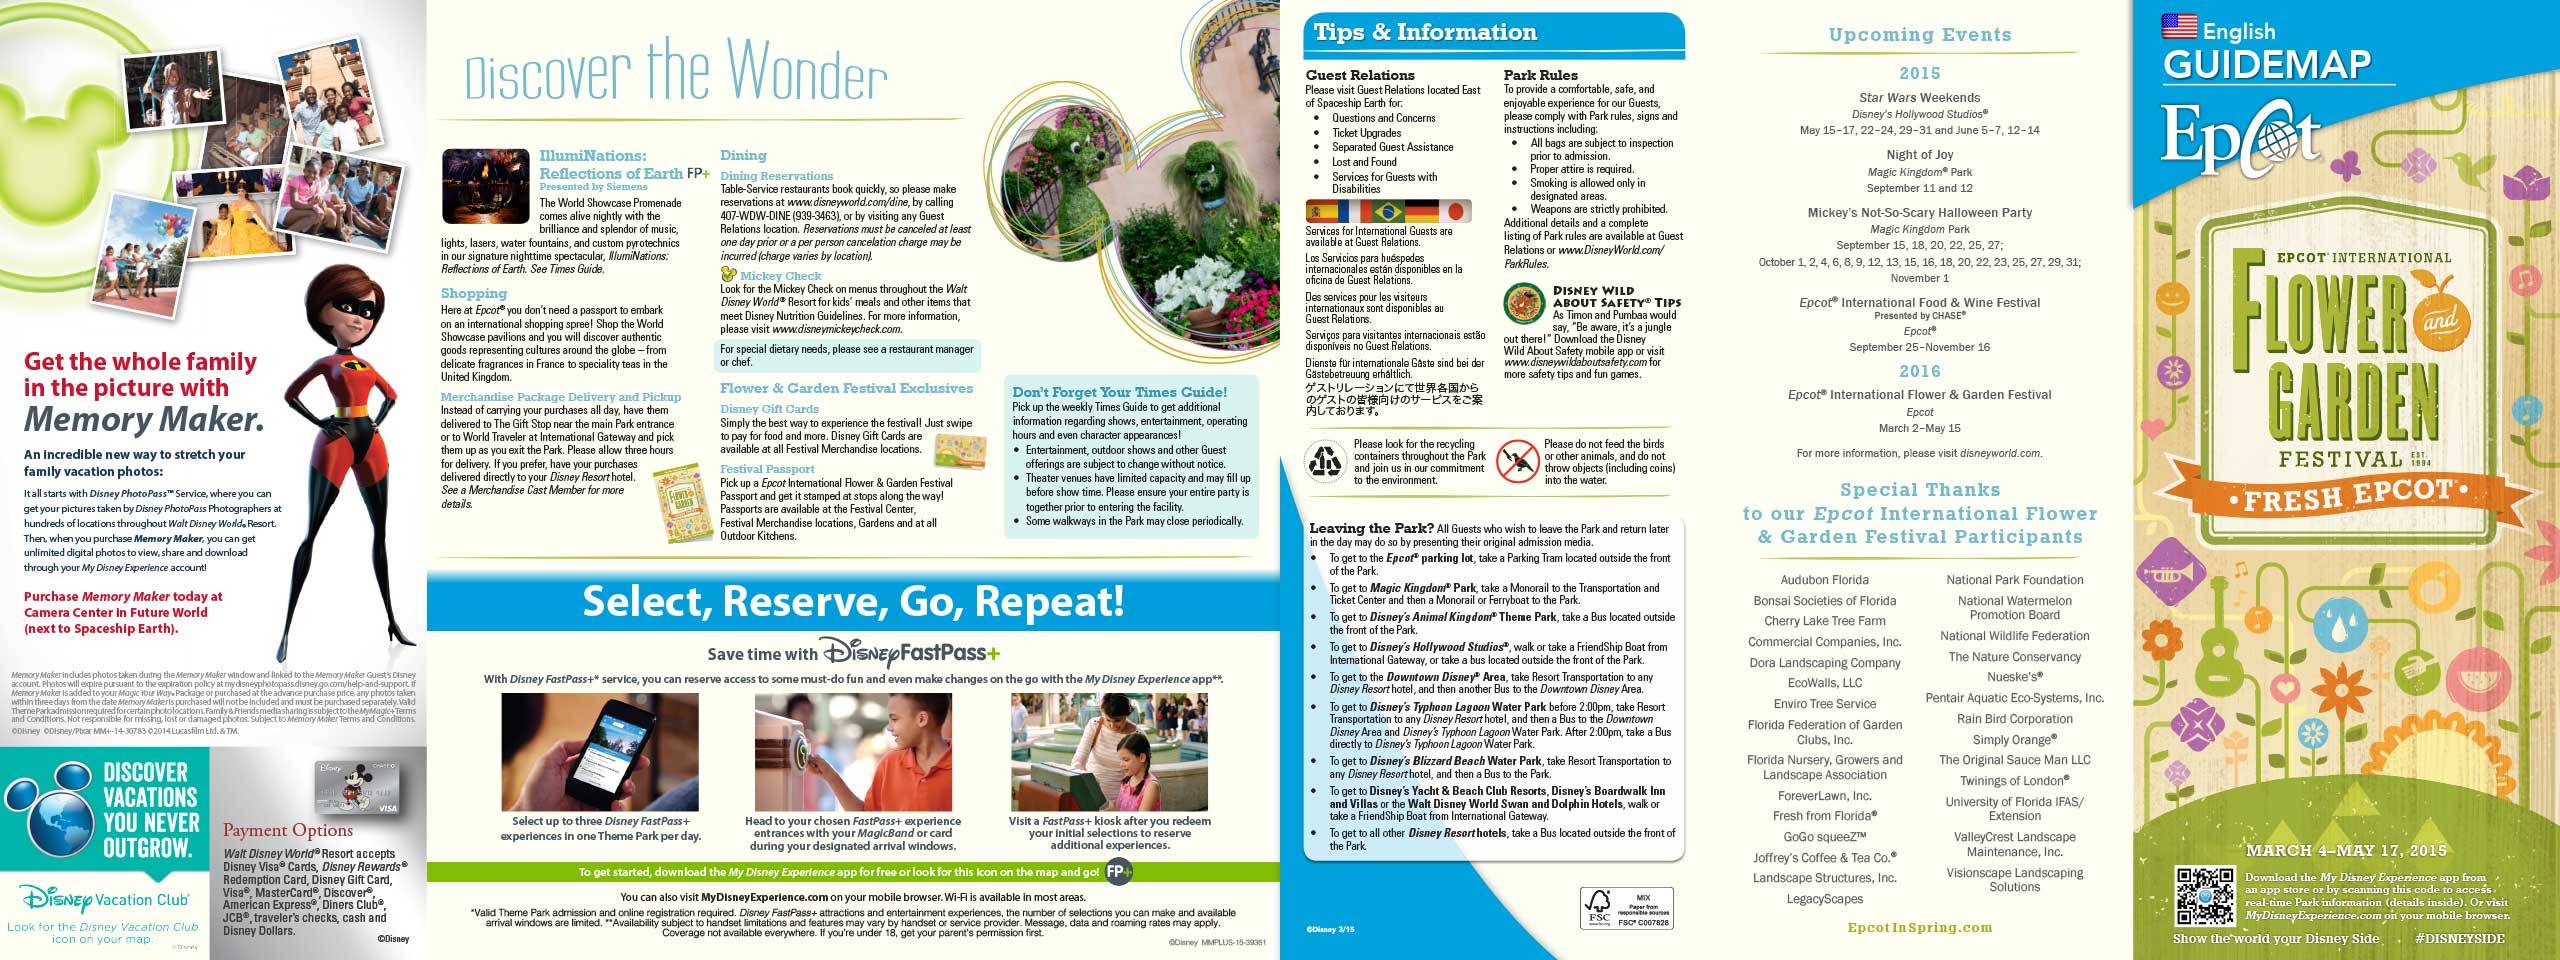 Guide-map now available for the 2015 Epcot International Flower and Garden Festival